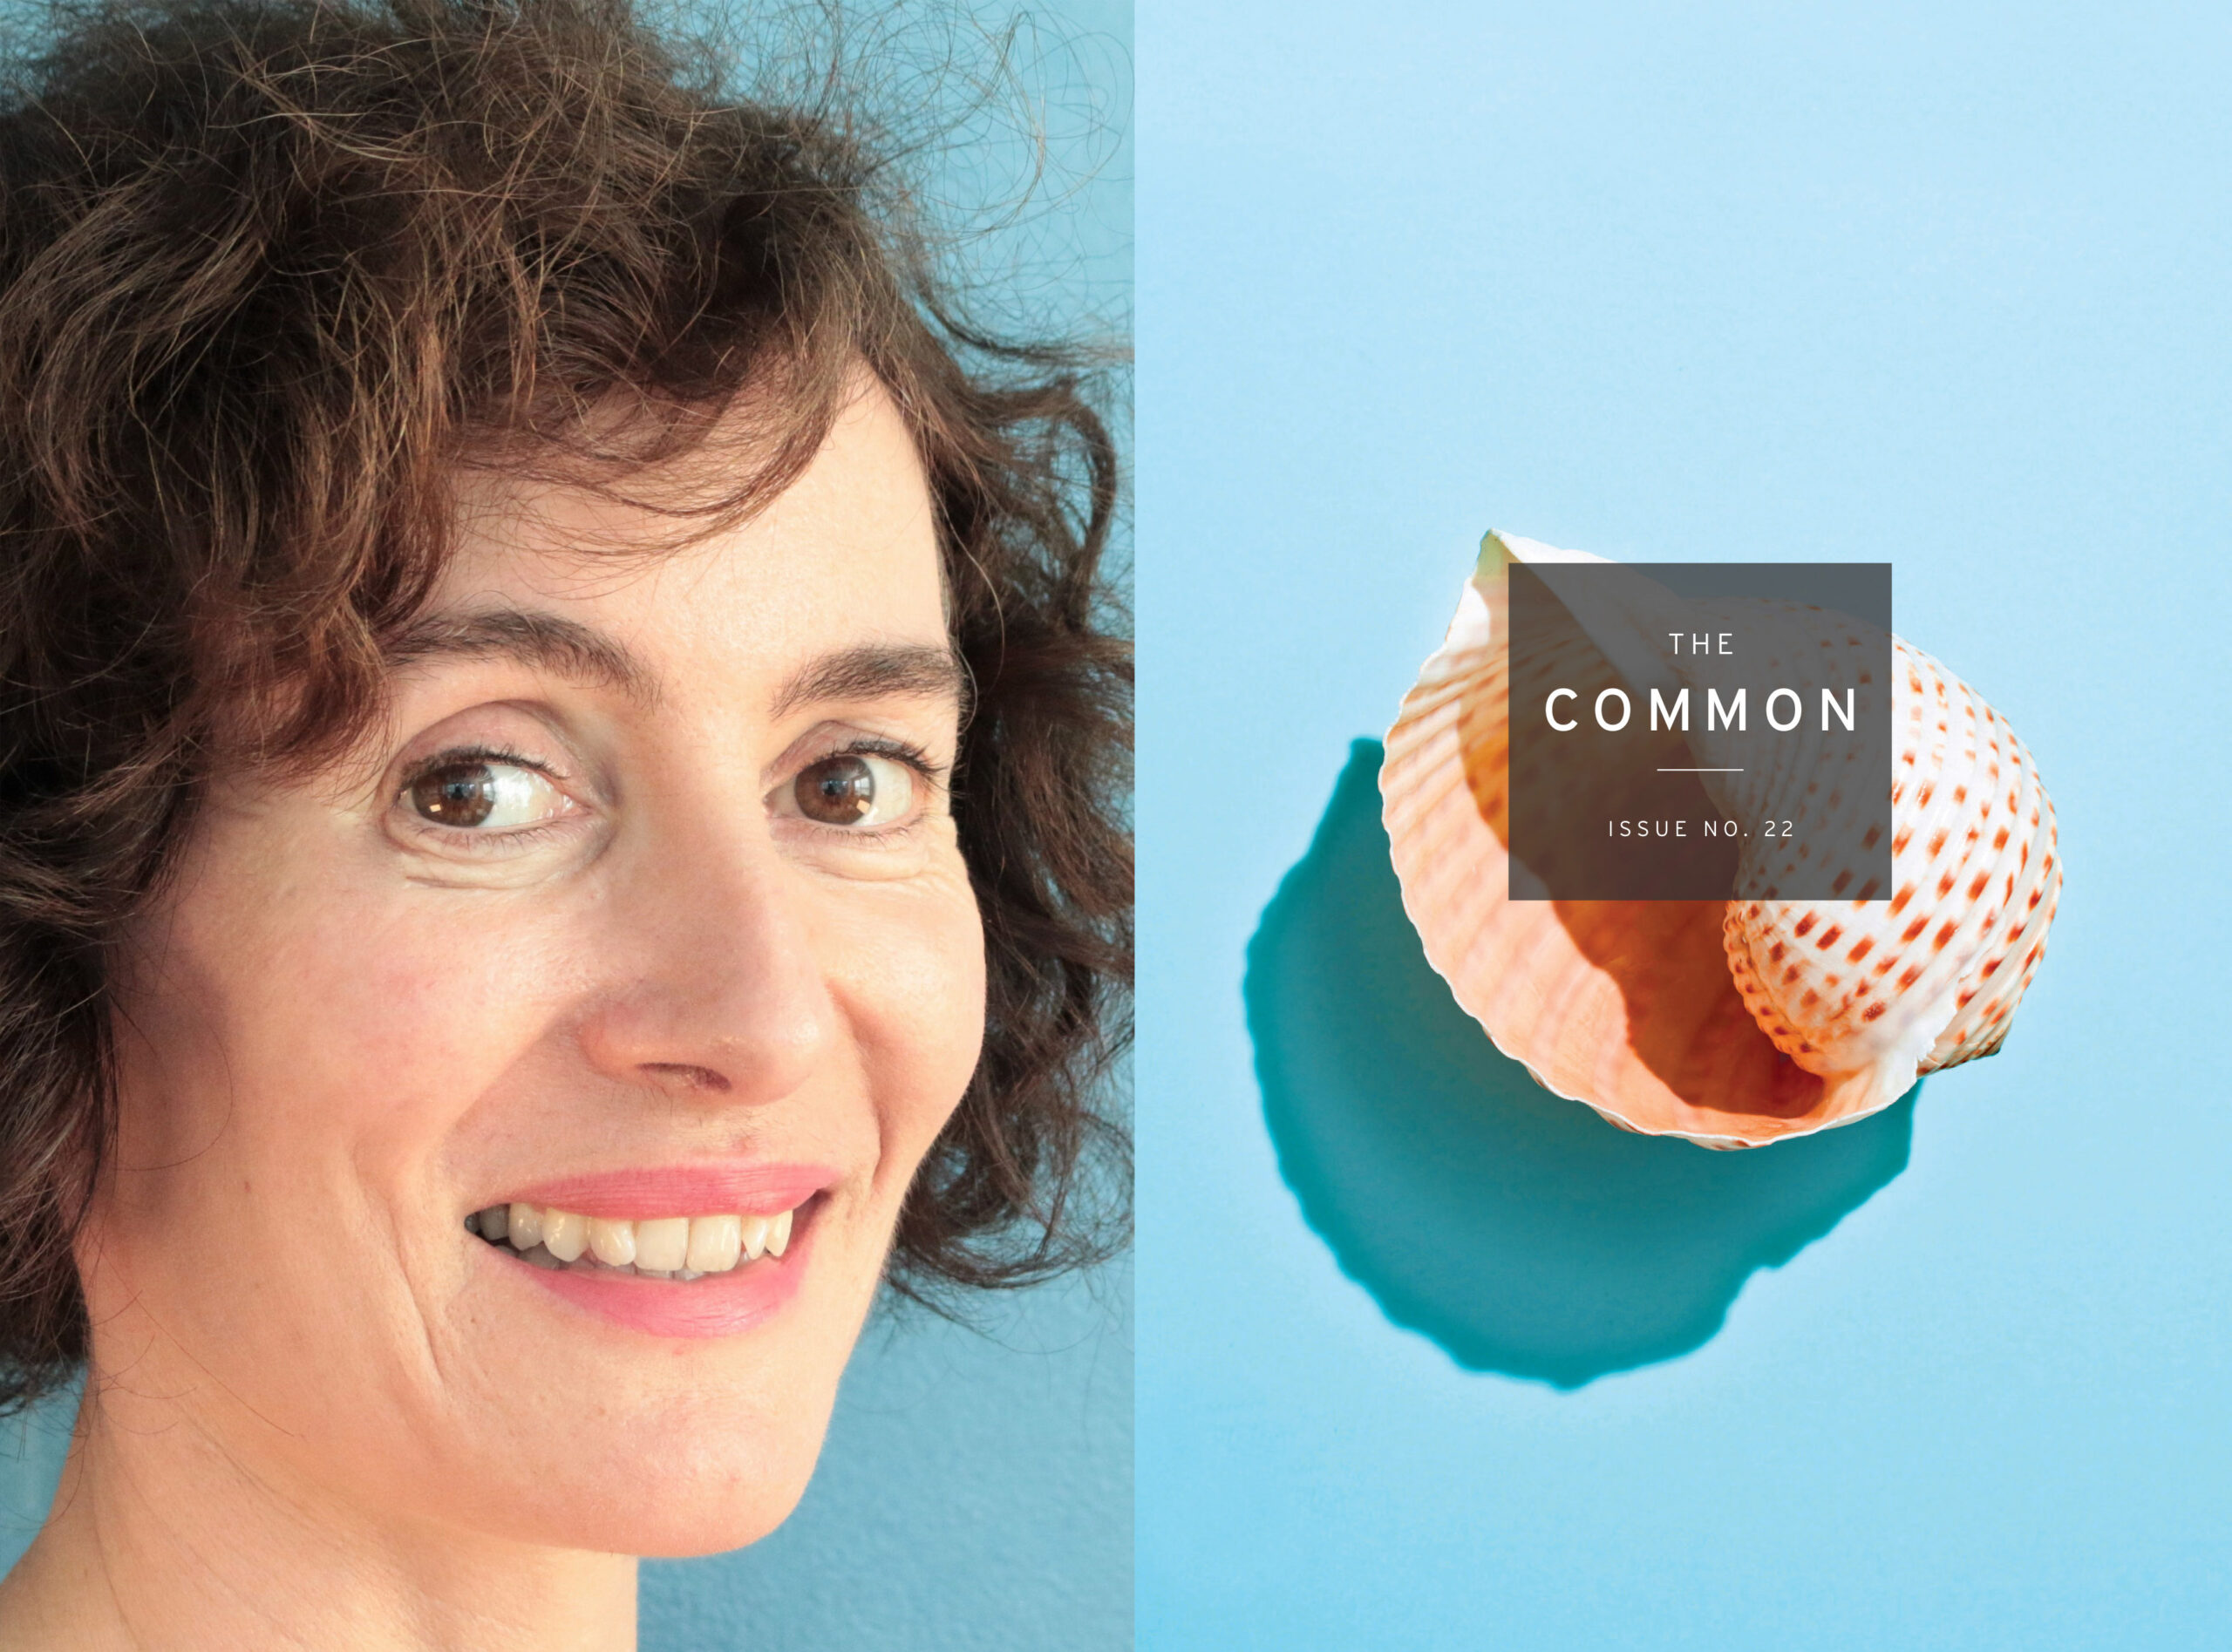 Headshot of Mary O'Donoghue (white woman with curly hair) next to cover of The Common ISsue 22 (pink seashell on blue background)